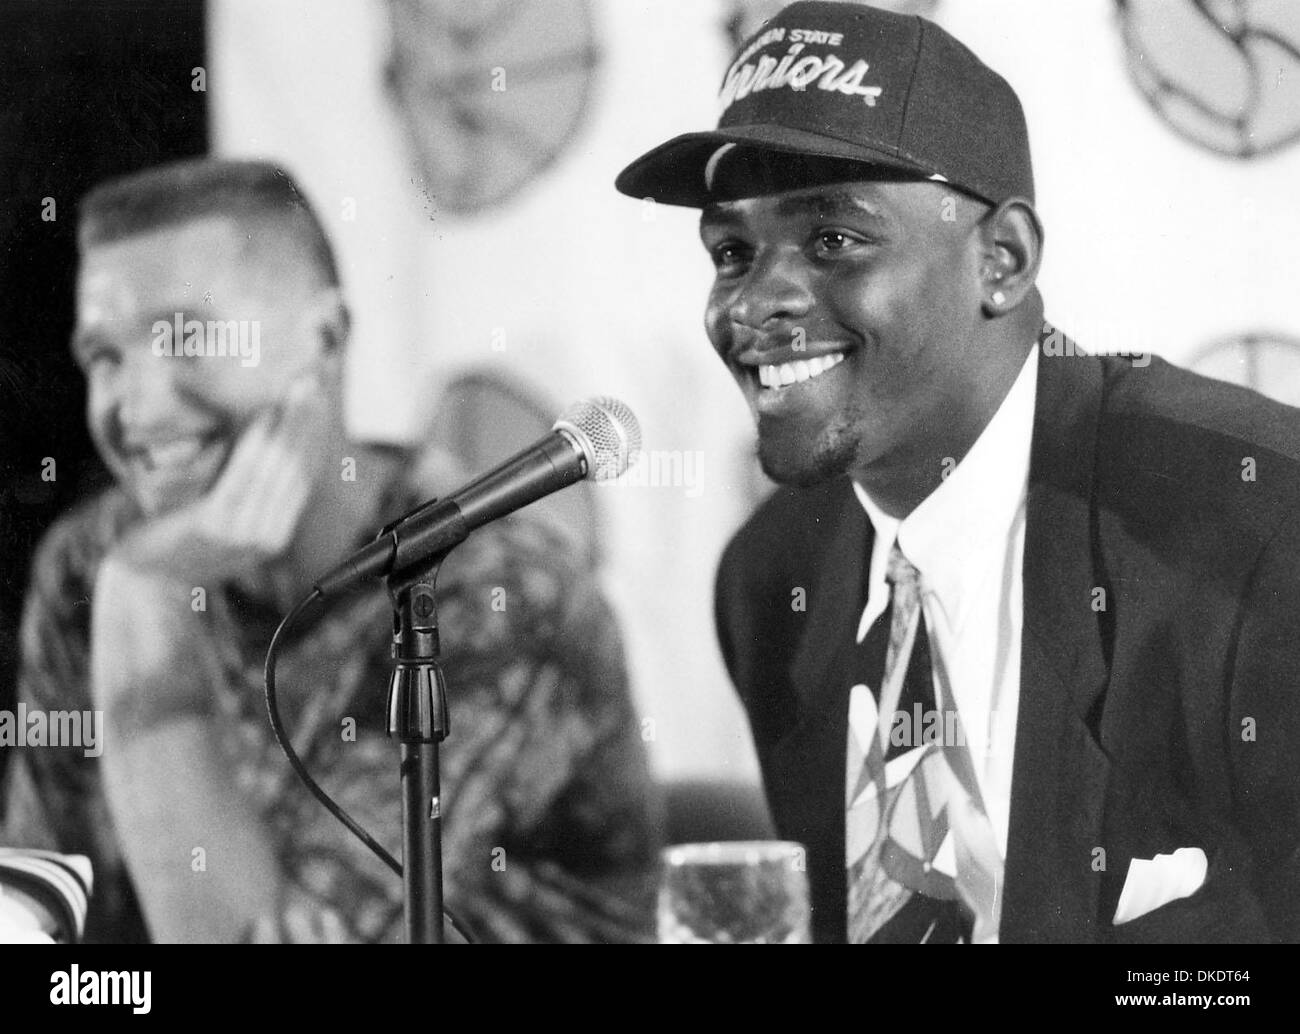 Apr 20, 2007 - Oakland, CA, USA - CHRIS WEBBER during a press conference. (Credit Image: © Oakland Tribune/ZUMA Press) RESTRICTIONS: USA Tabloid RIGHTS OUT! Stock Photo